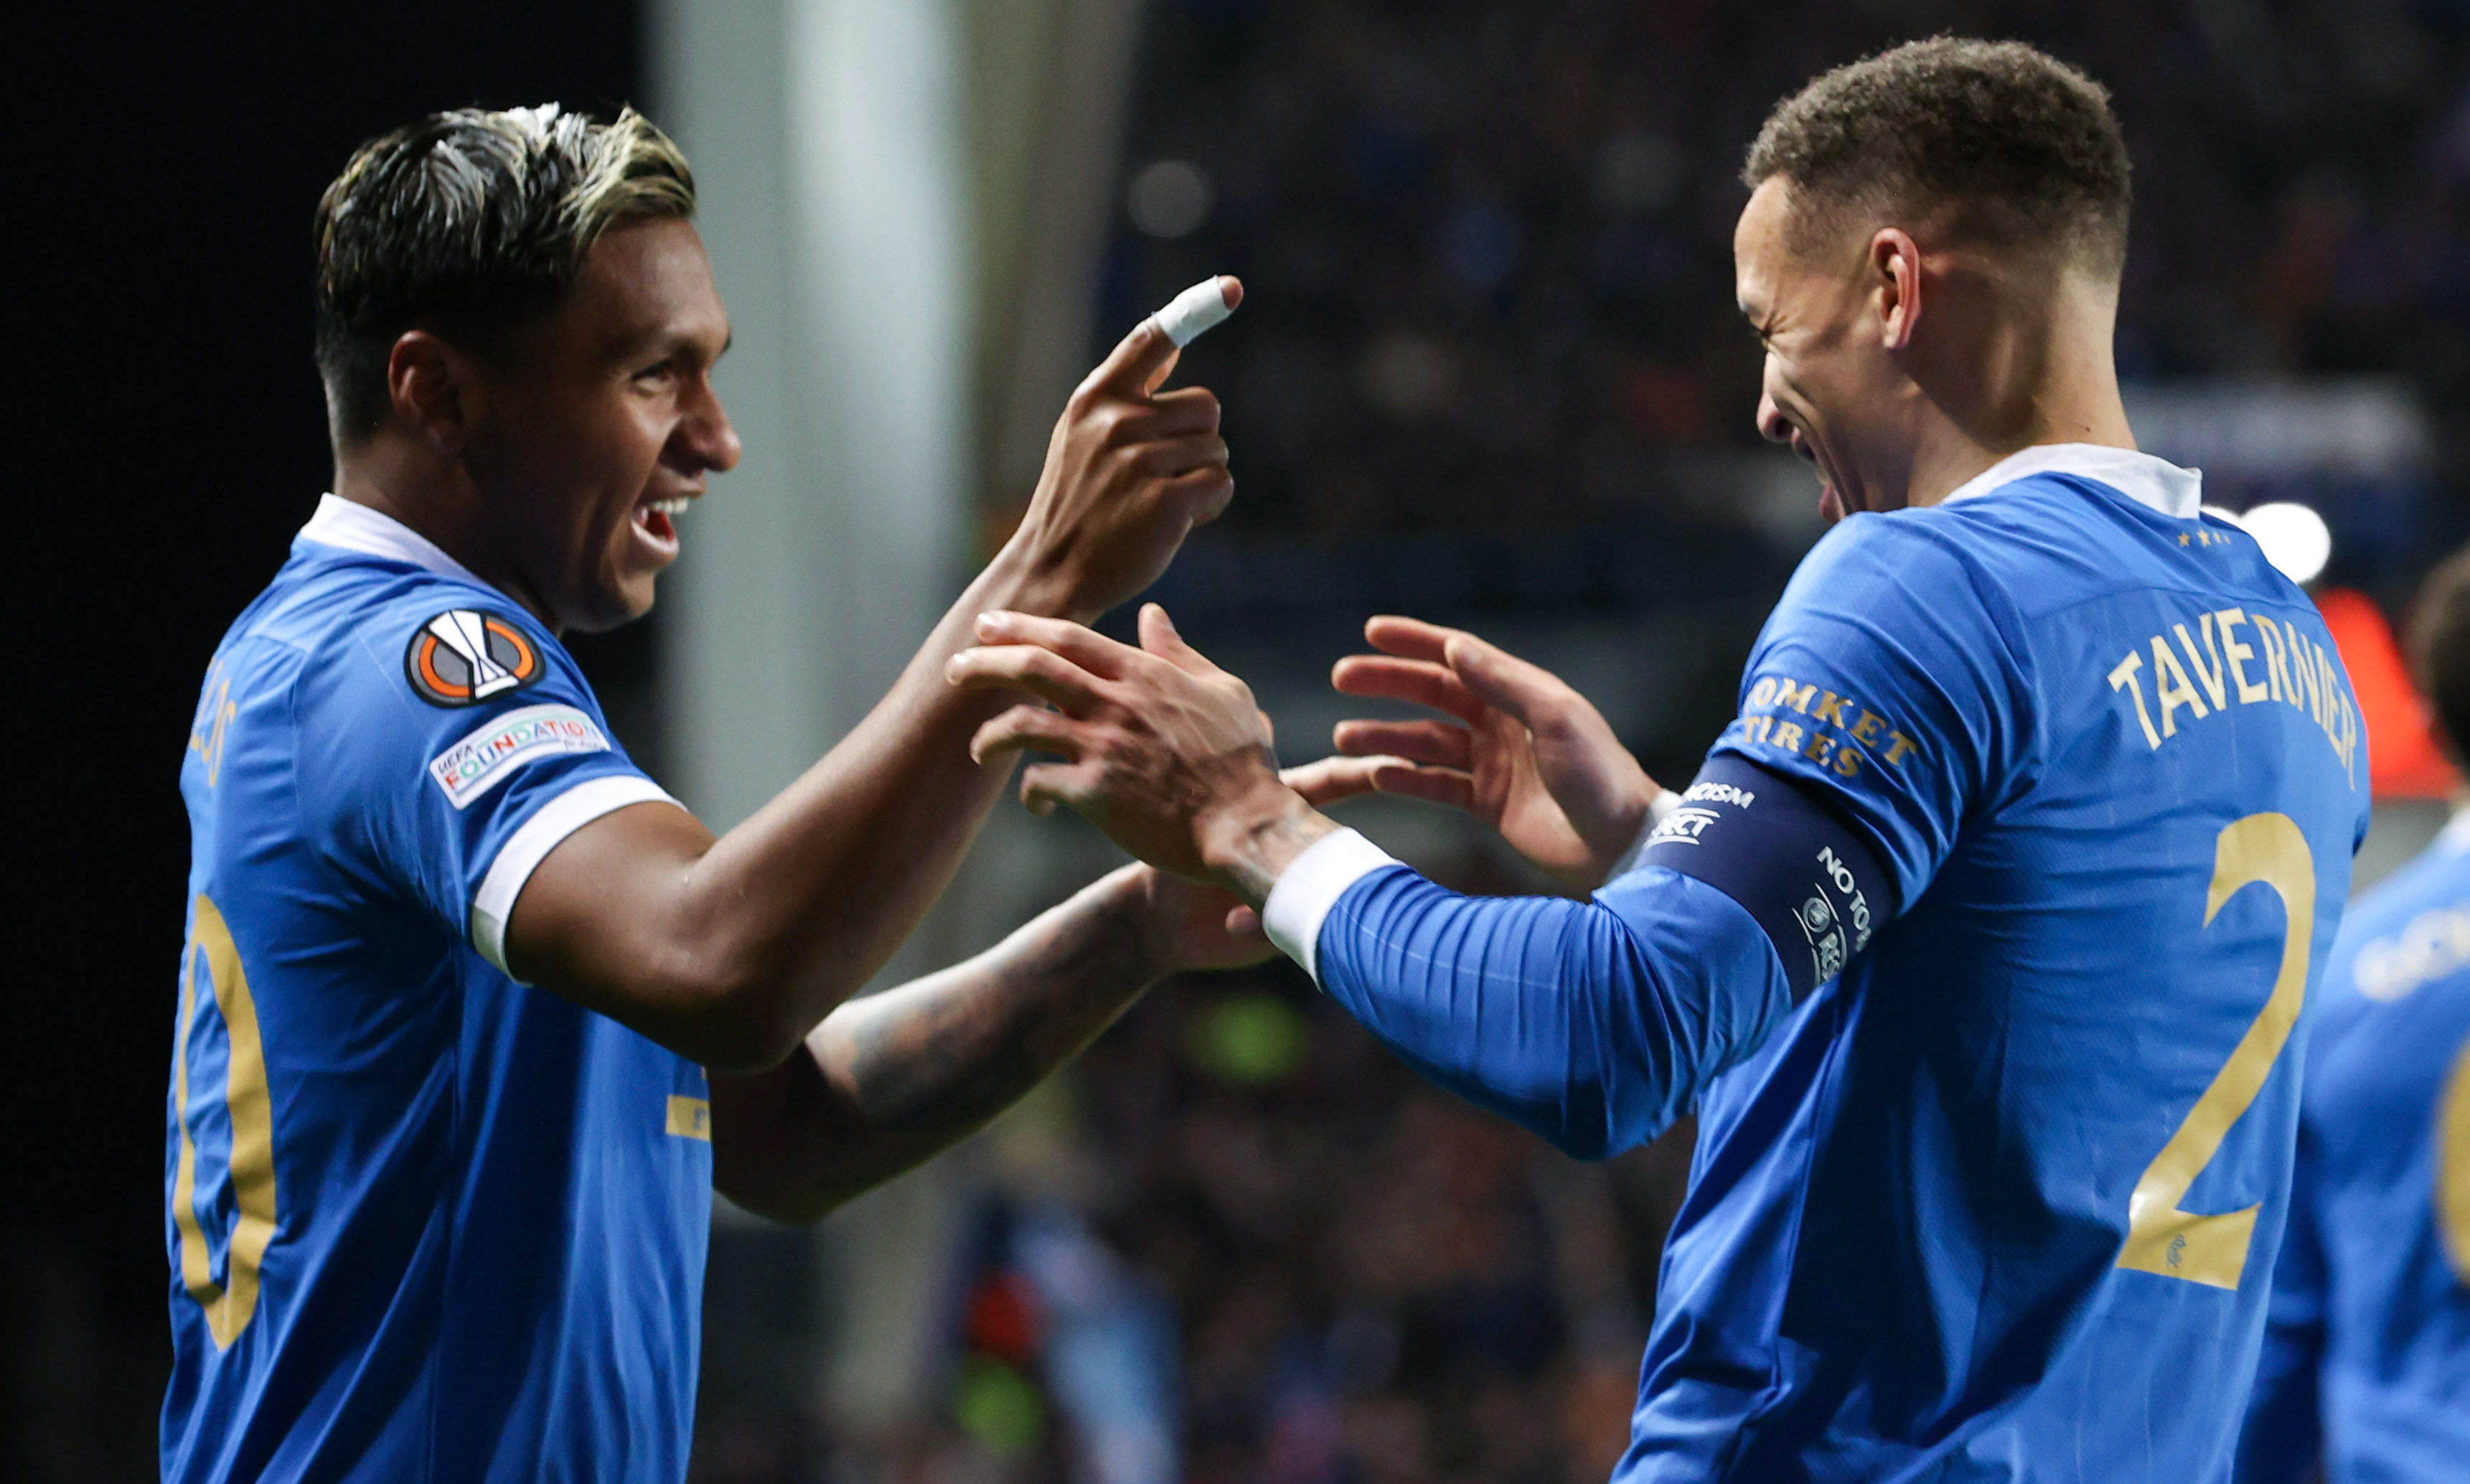 Rangers 2-2 Borussia Dortmund Highlights: Borussia Dortmund are 'KNOCKED OUT' of the Europa League after Rangers beat Dortmund 6-4 on Aggregate